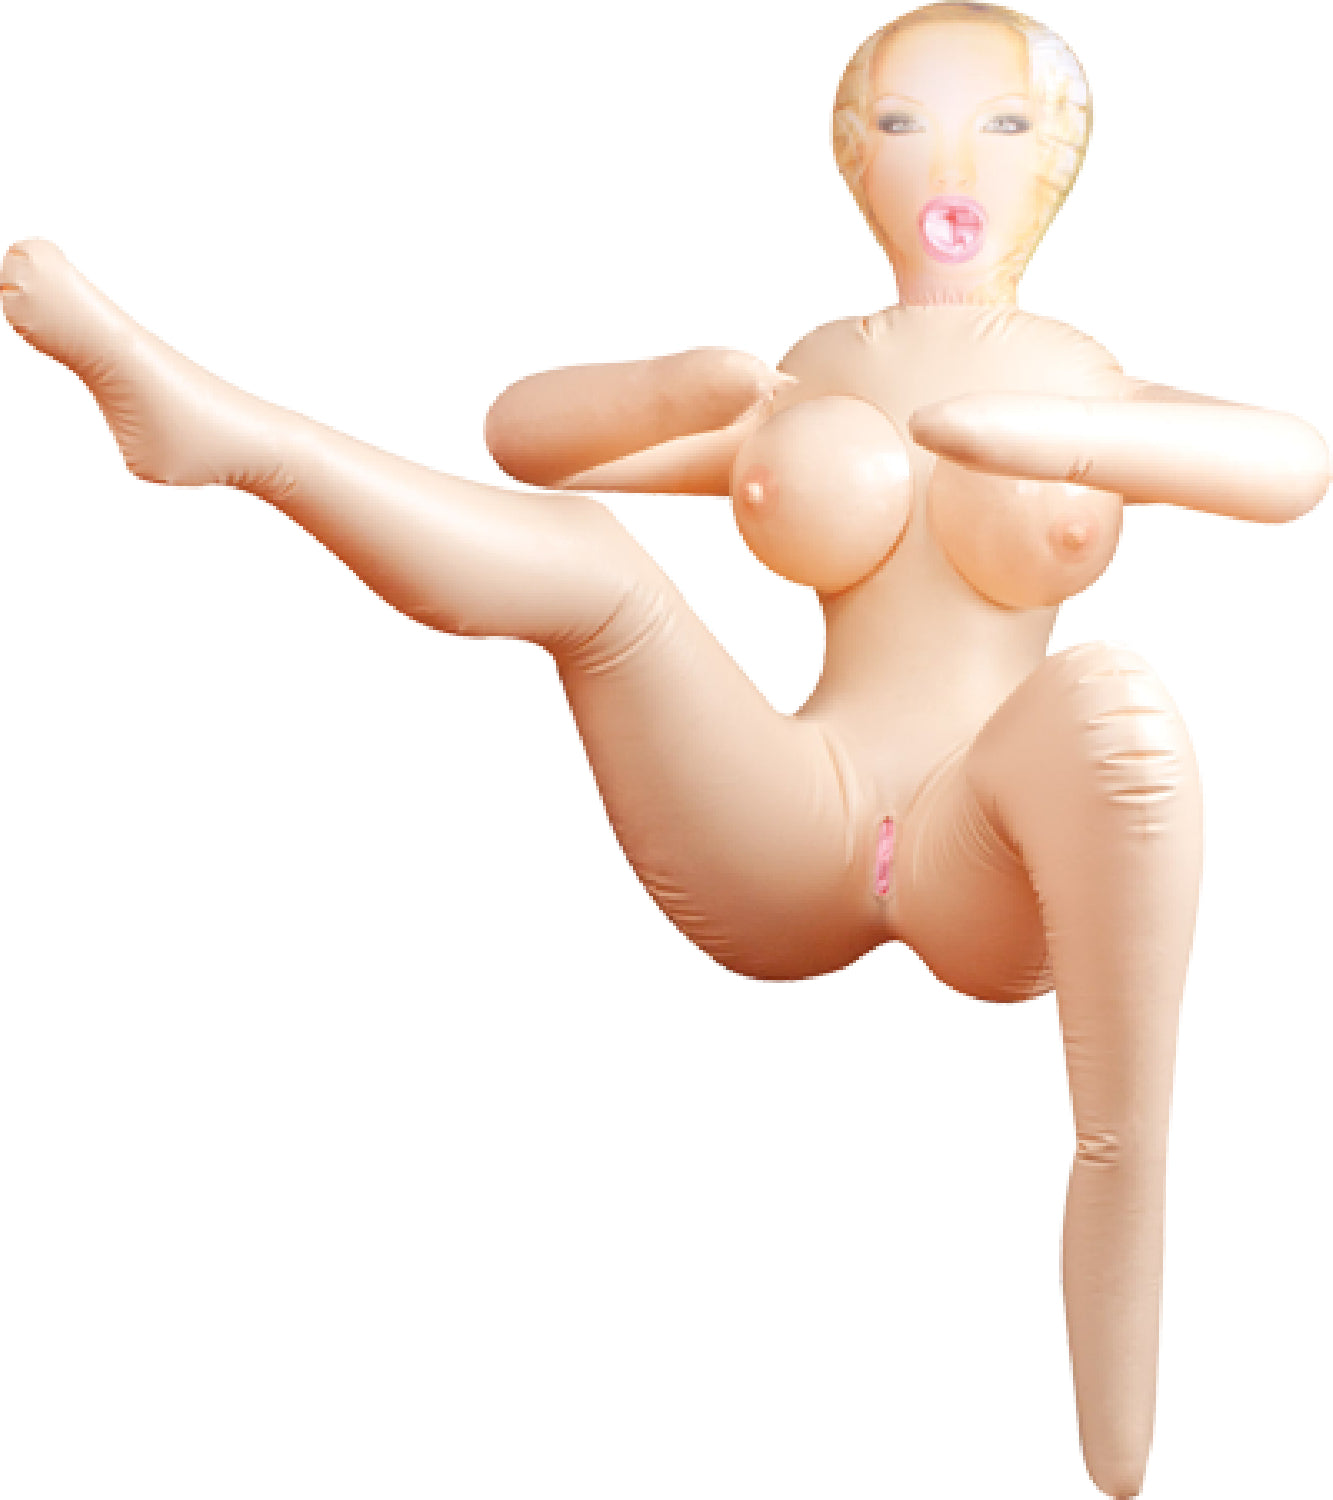 Inflatable Love Doll - Kelly Carmell